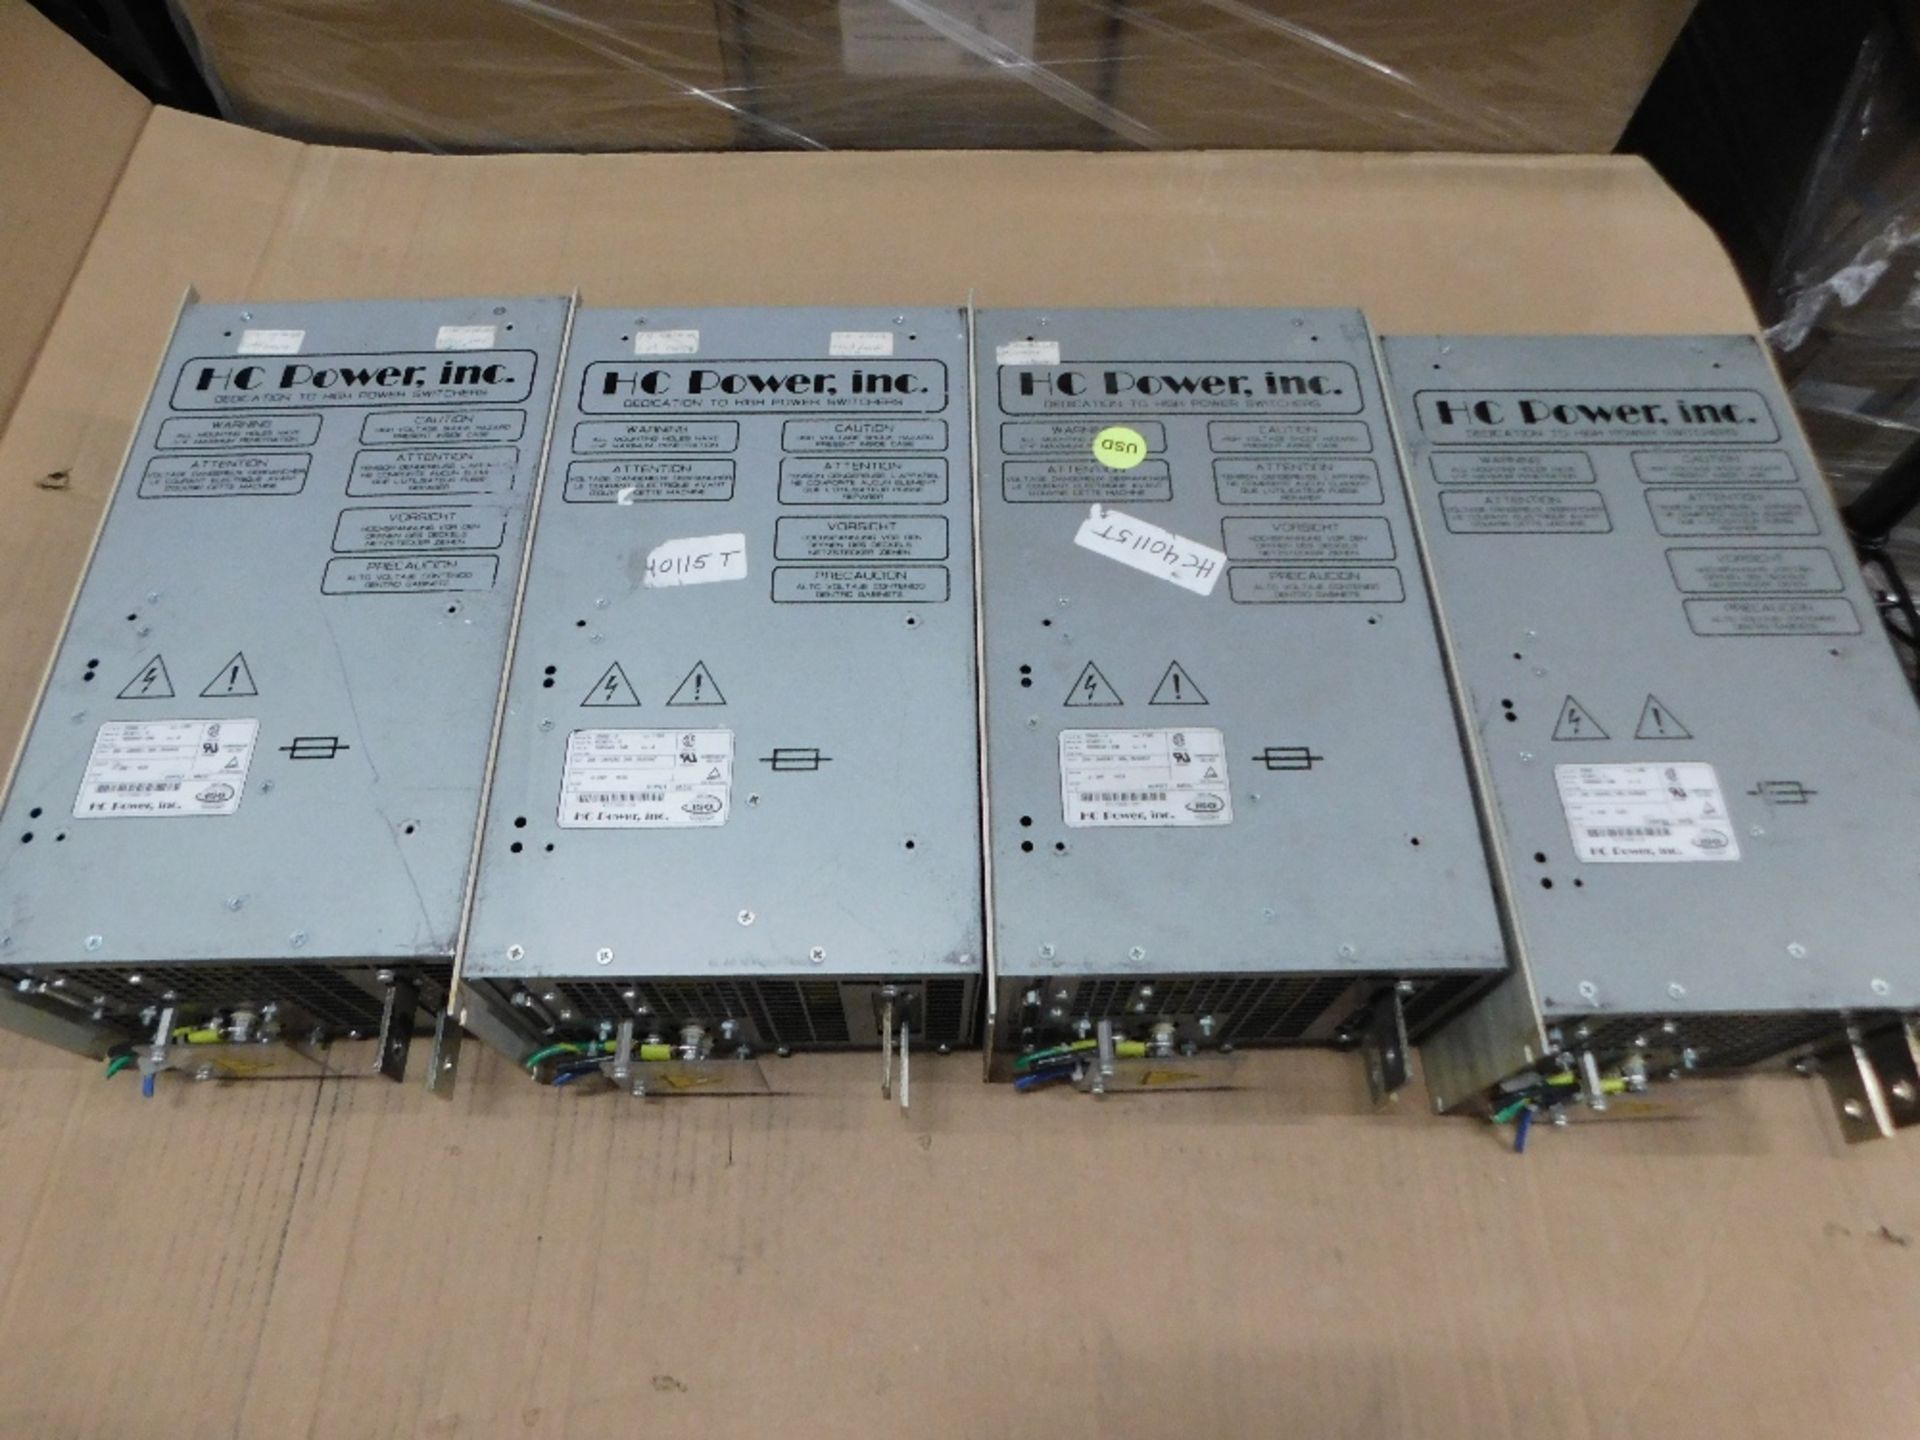 4x HC Power Used Surplus HC4011-5 Other Power Supplies 30A 208/240VAC